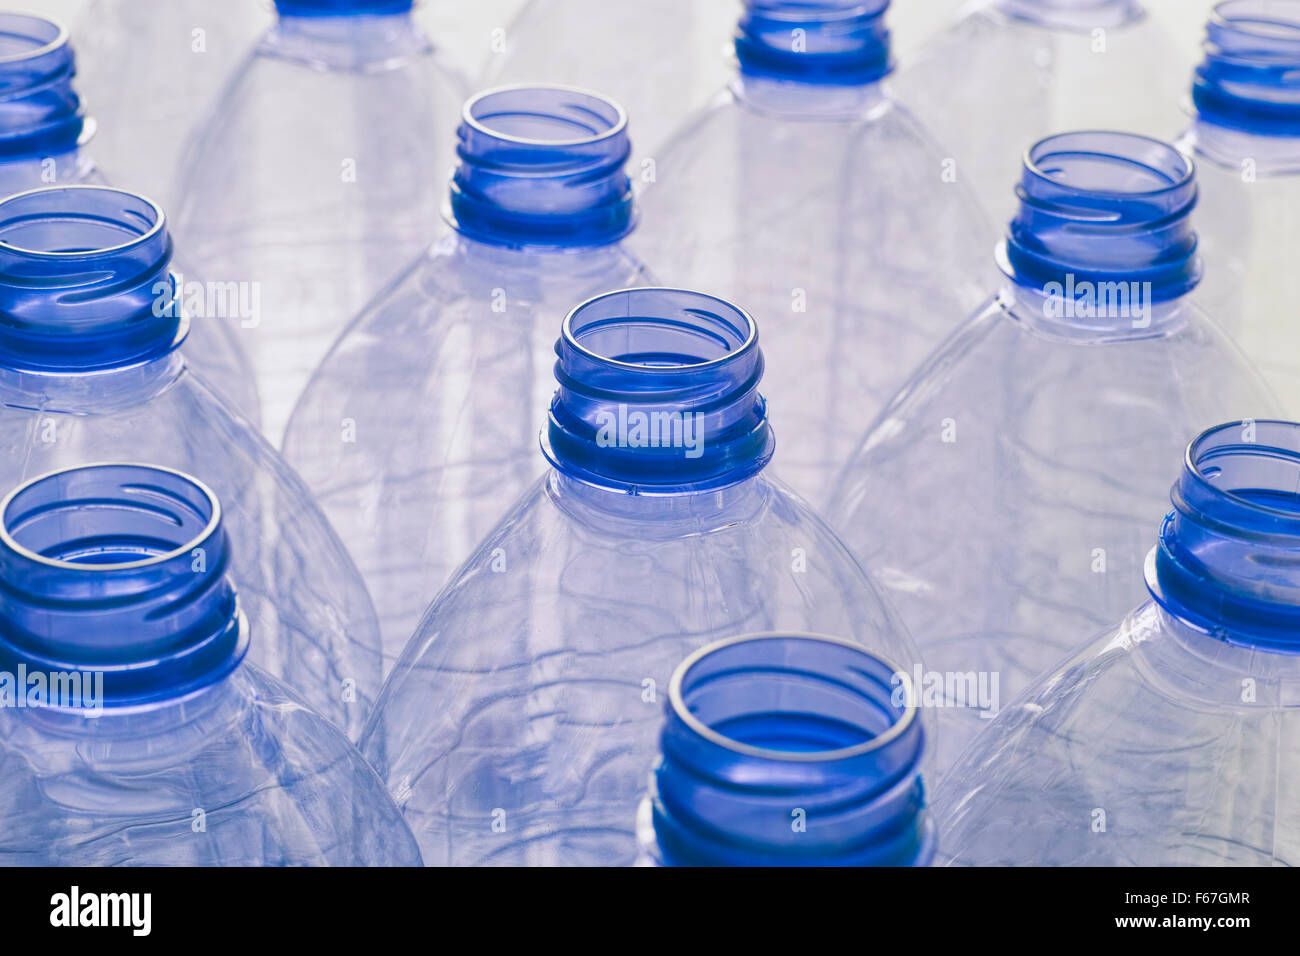 Pile Of Recycled Plastic Water Bottle Containers by Stocksy Contributor  Rialto Images - Stocksy